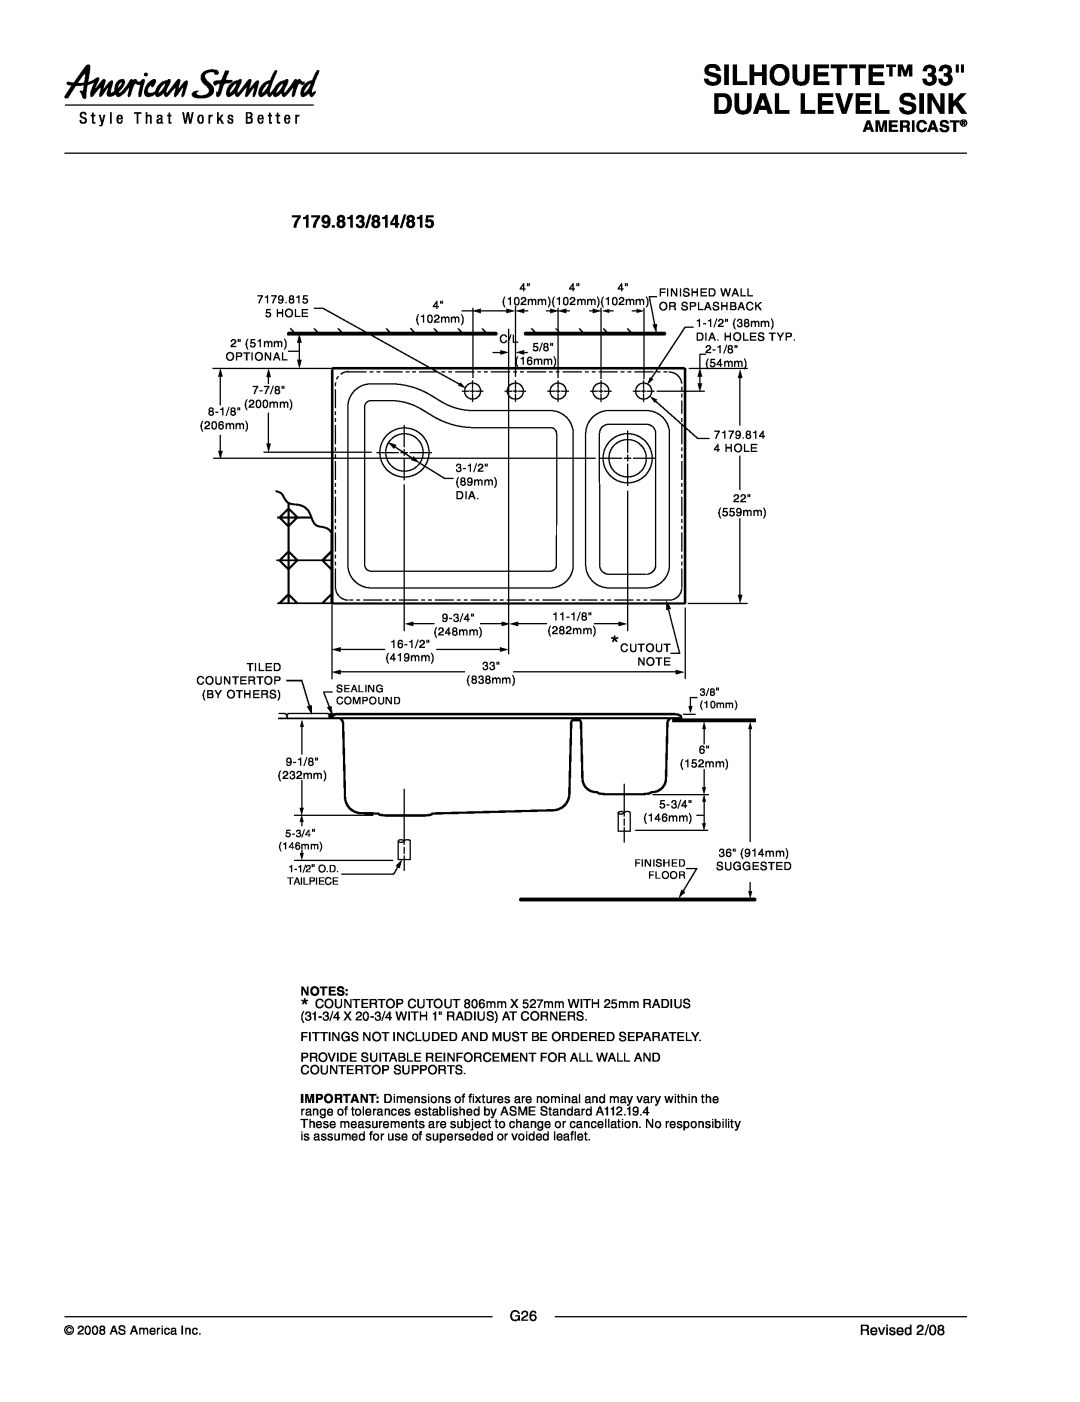 American Standard 7179.814, 7179.011, 7179.815 7179.813/814/815, Silhouette Dual Level Sink, Americast, Revised 2/08 